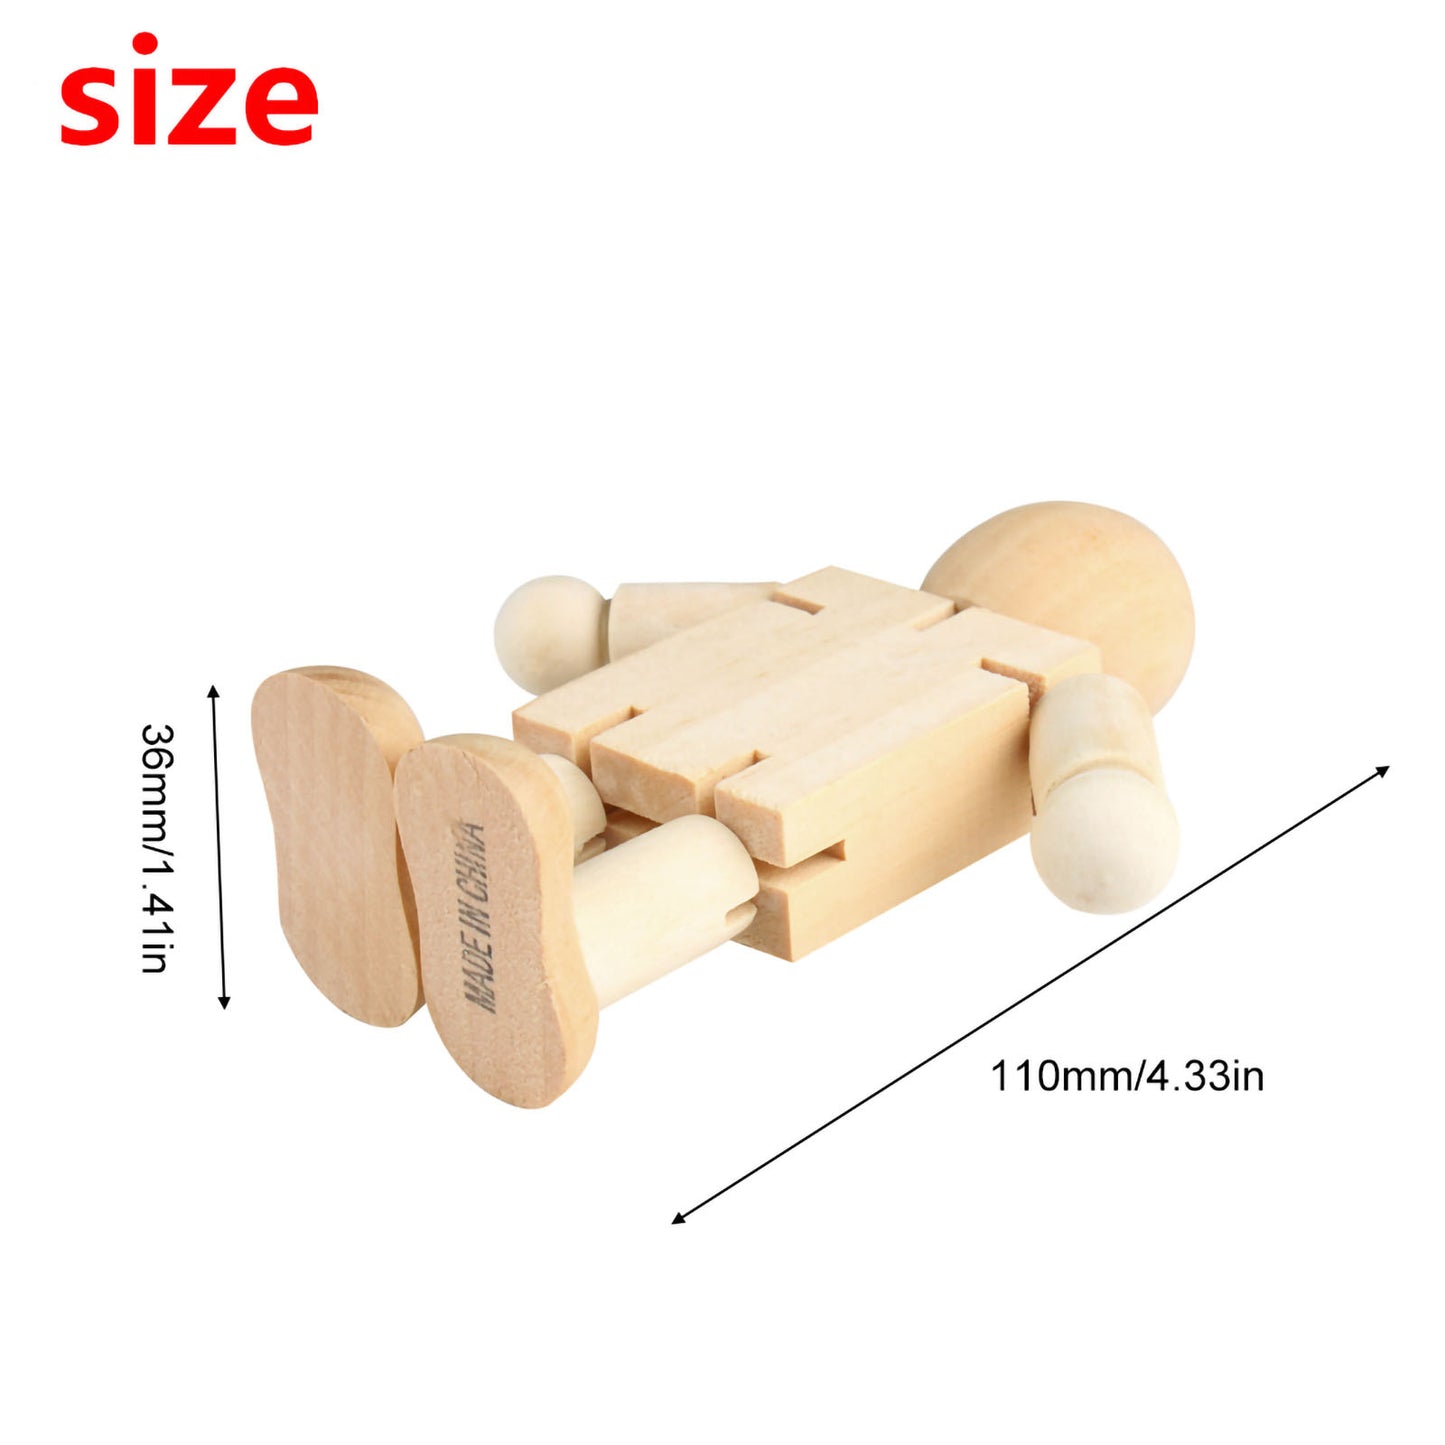 Andux wooden robot ever-changing cartoon hand-painted doll MZJQR-01